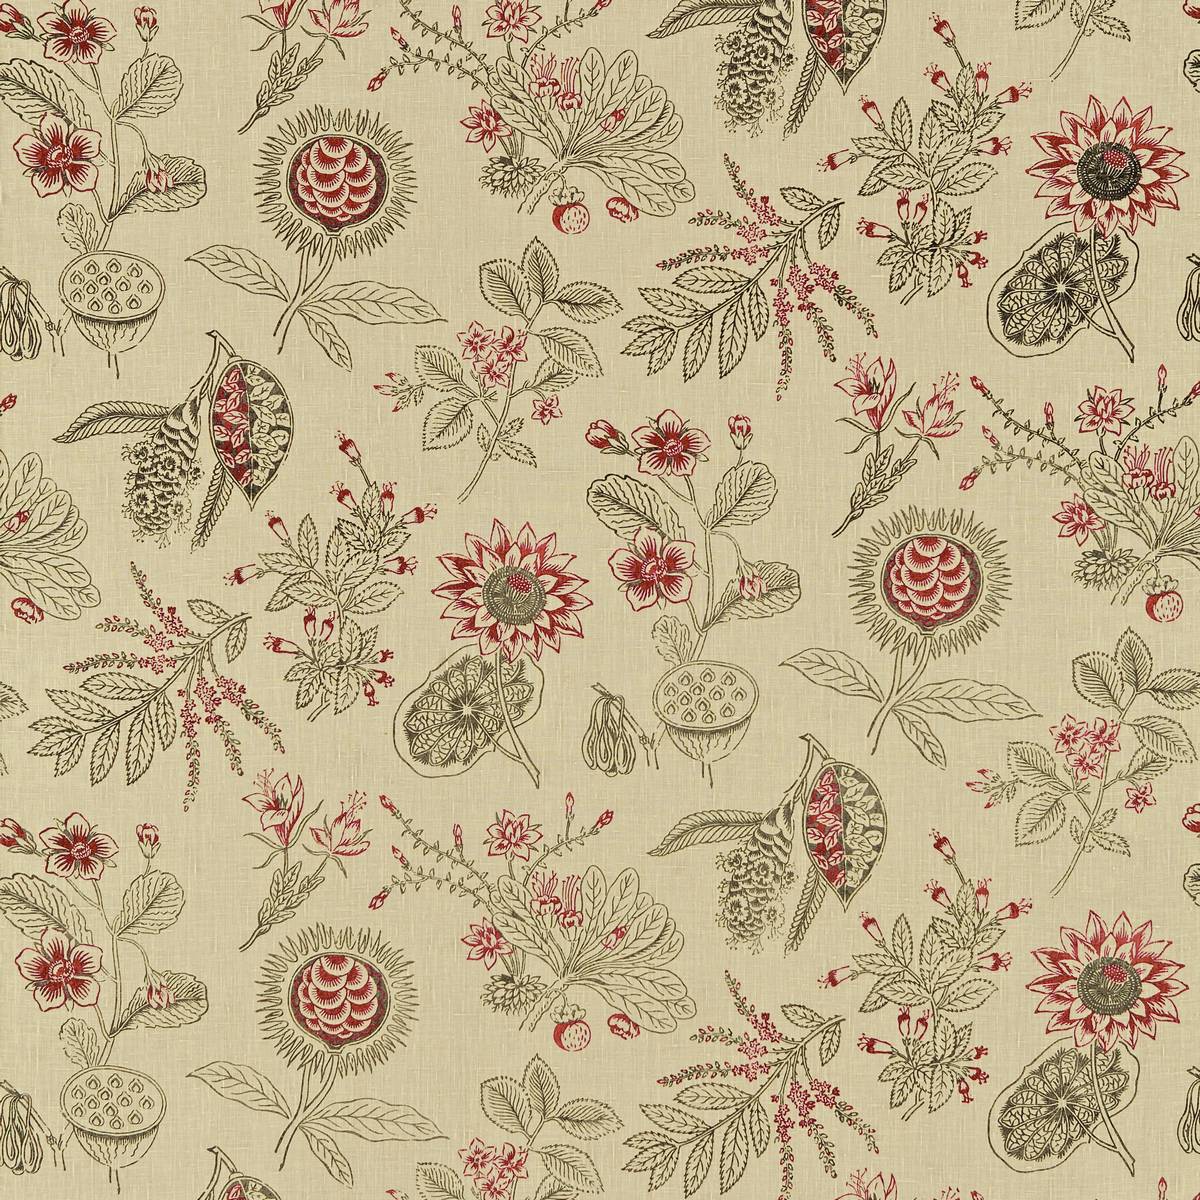 Botanique Black/Russet Fabric by Zoffany